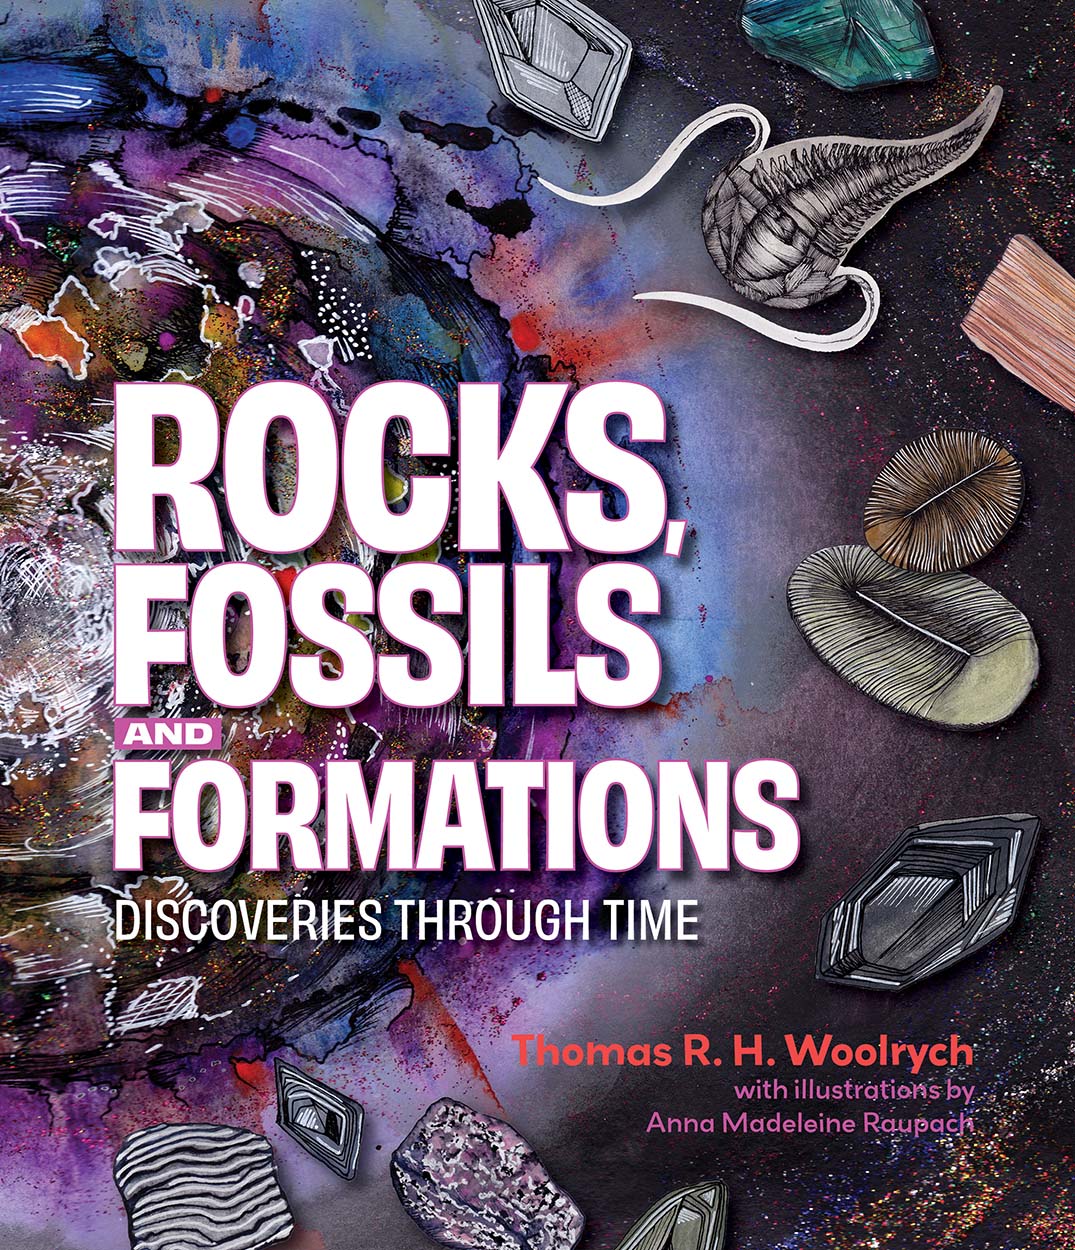 Cover of 'Rocks, Fossils and Formations', featuring illustrations of various fossils, types of rock and gemstones.